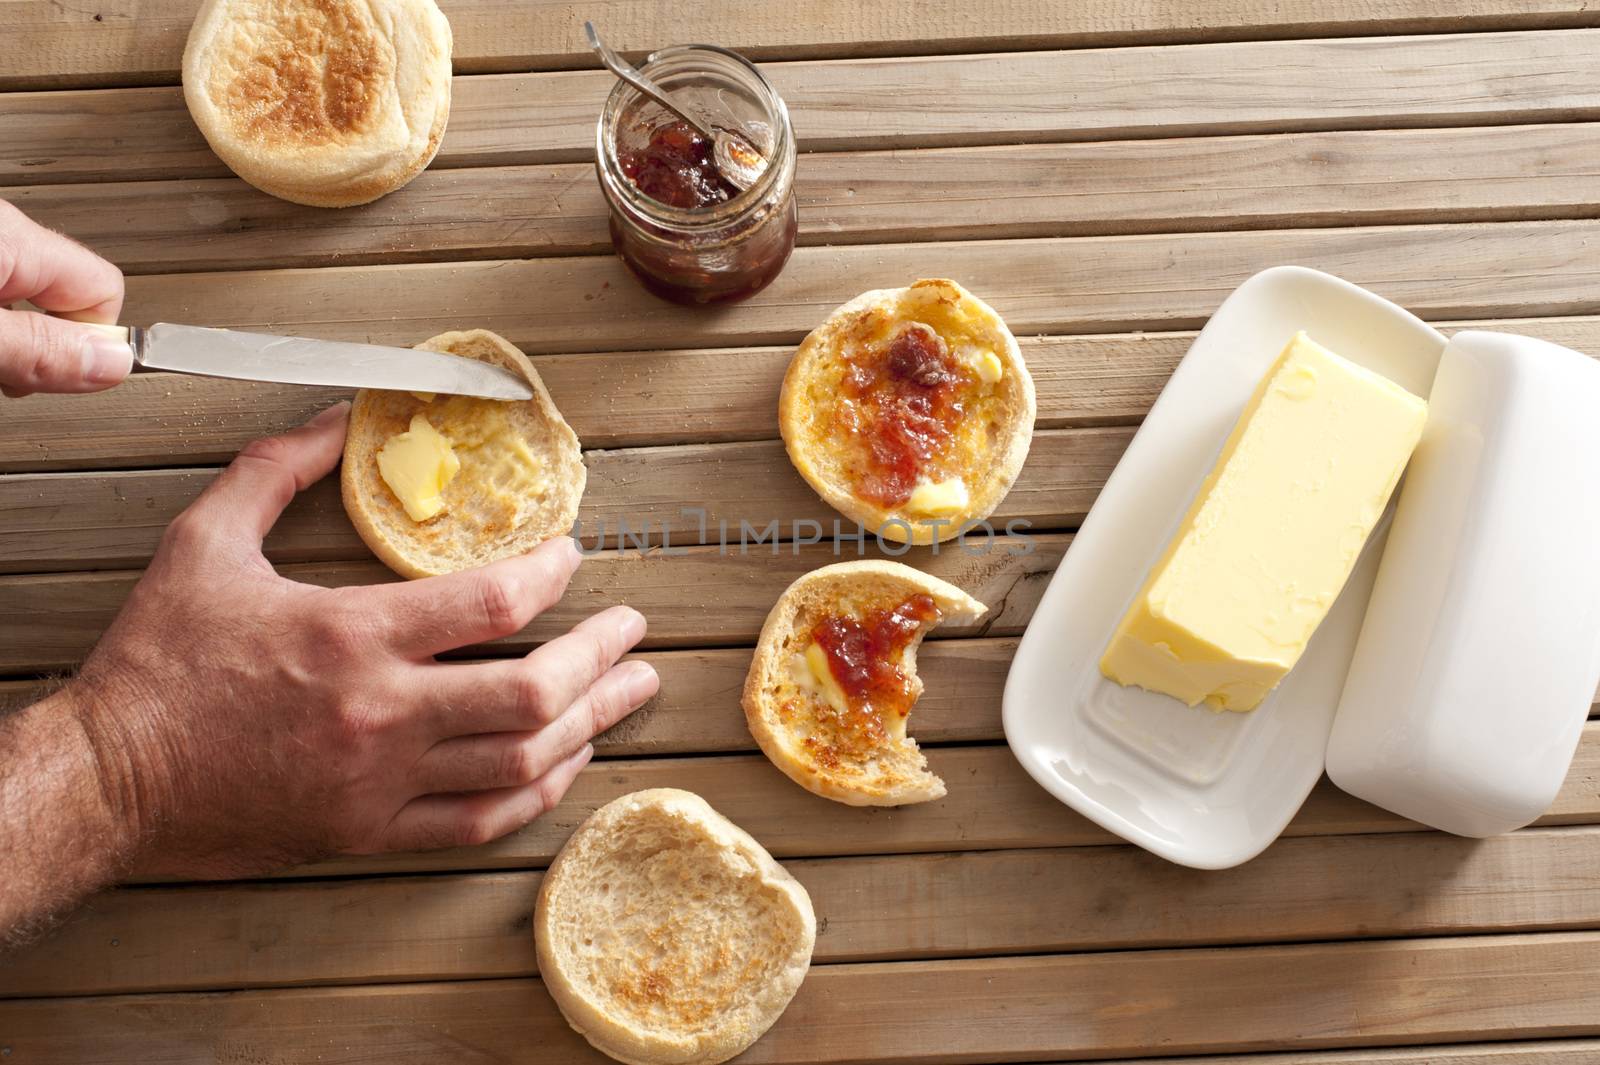 Man buttering a freshly toasted crumpet for breakfast, overhead view of his hands, the crumpets, jam and a pat of farm butter on a slatted wooden table